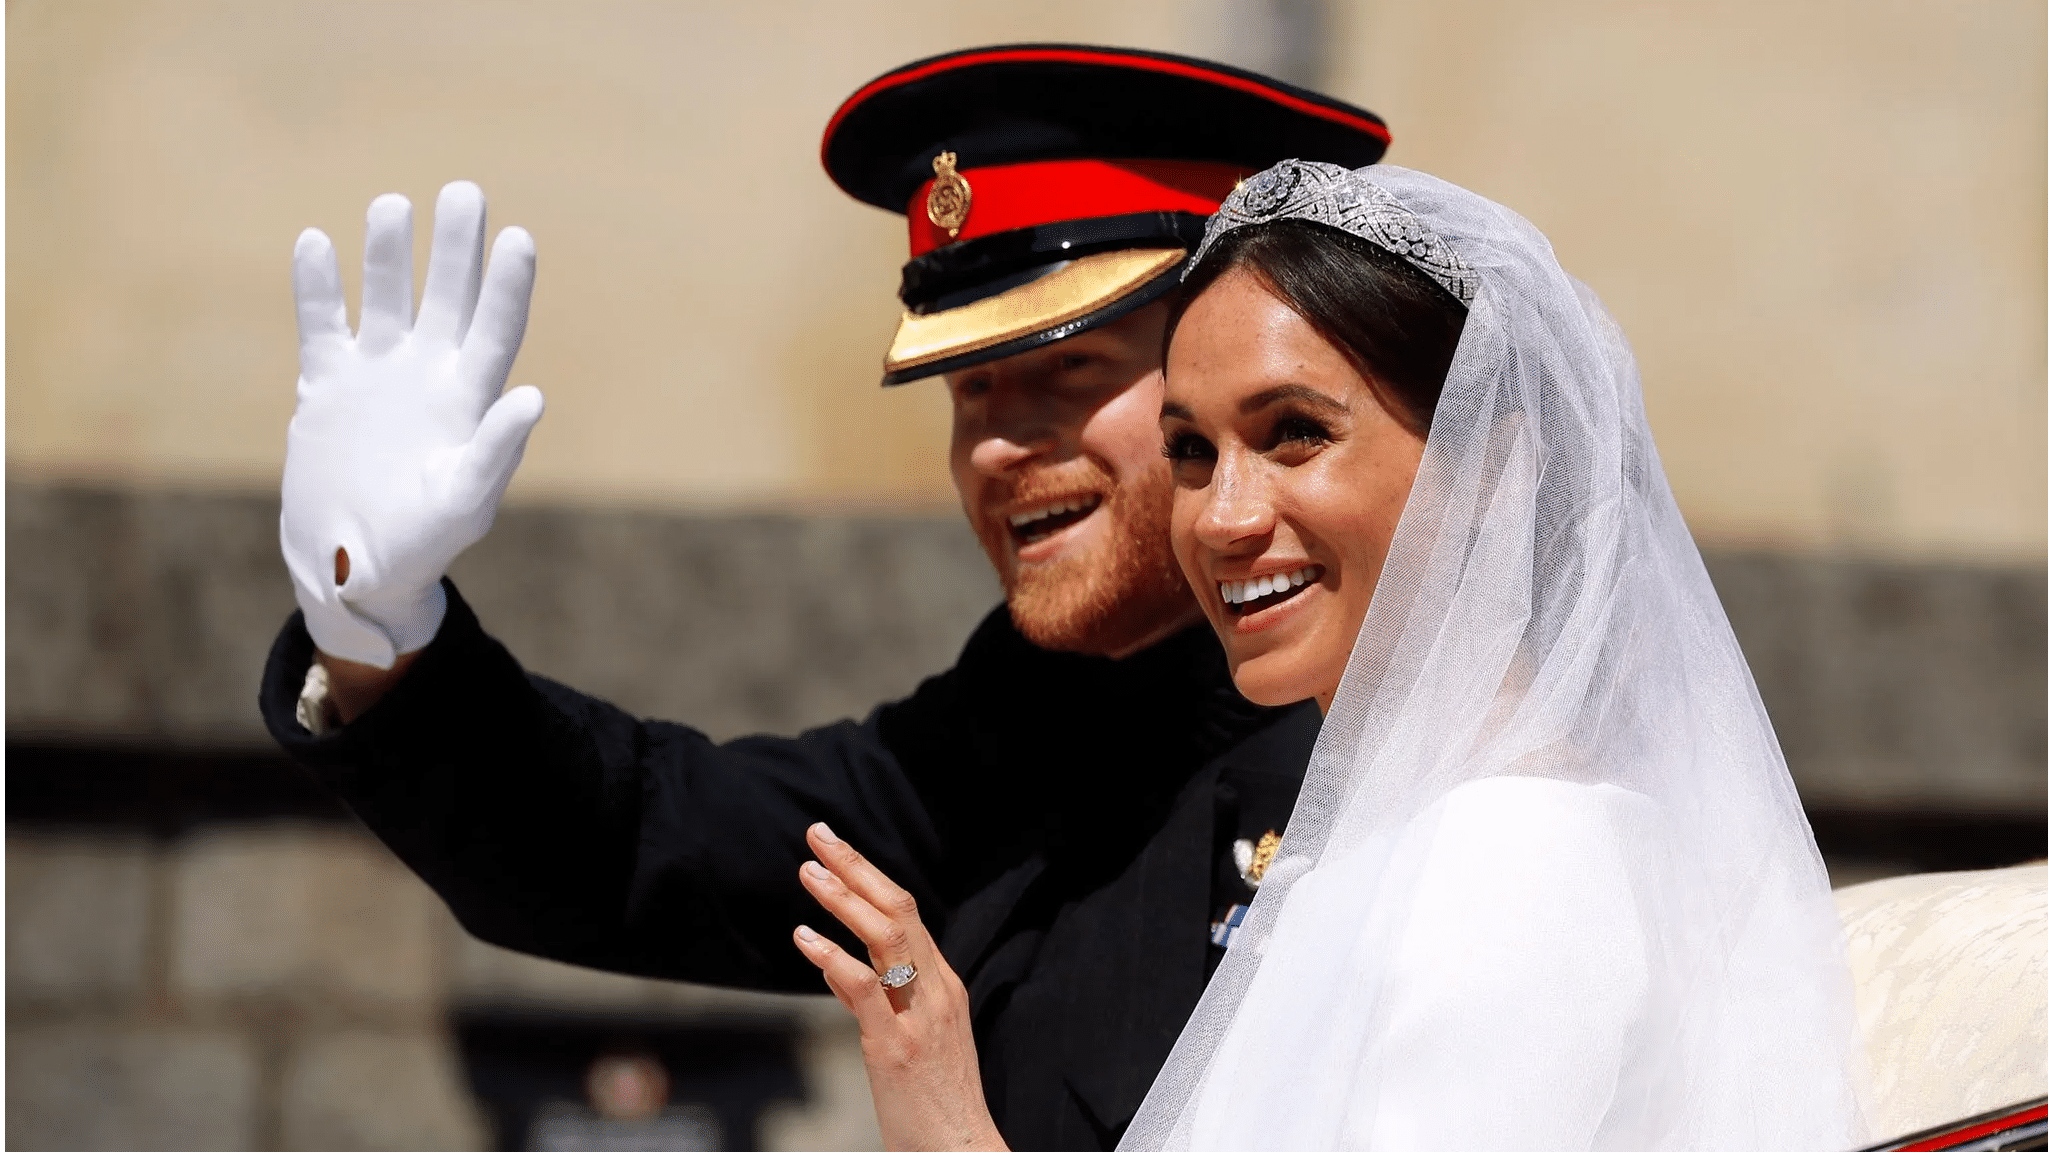 How the Royal Family congratulated Harry, Meghan after birth of their daughter